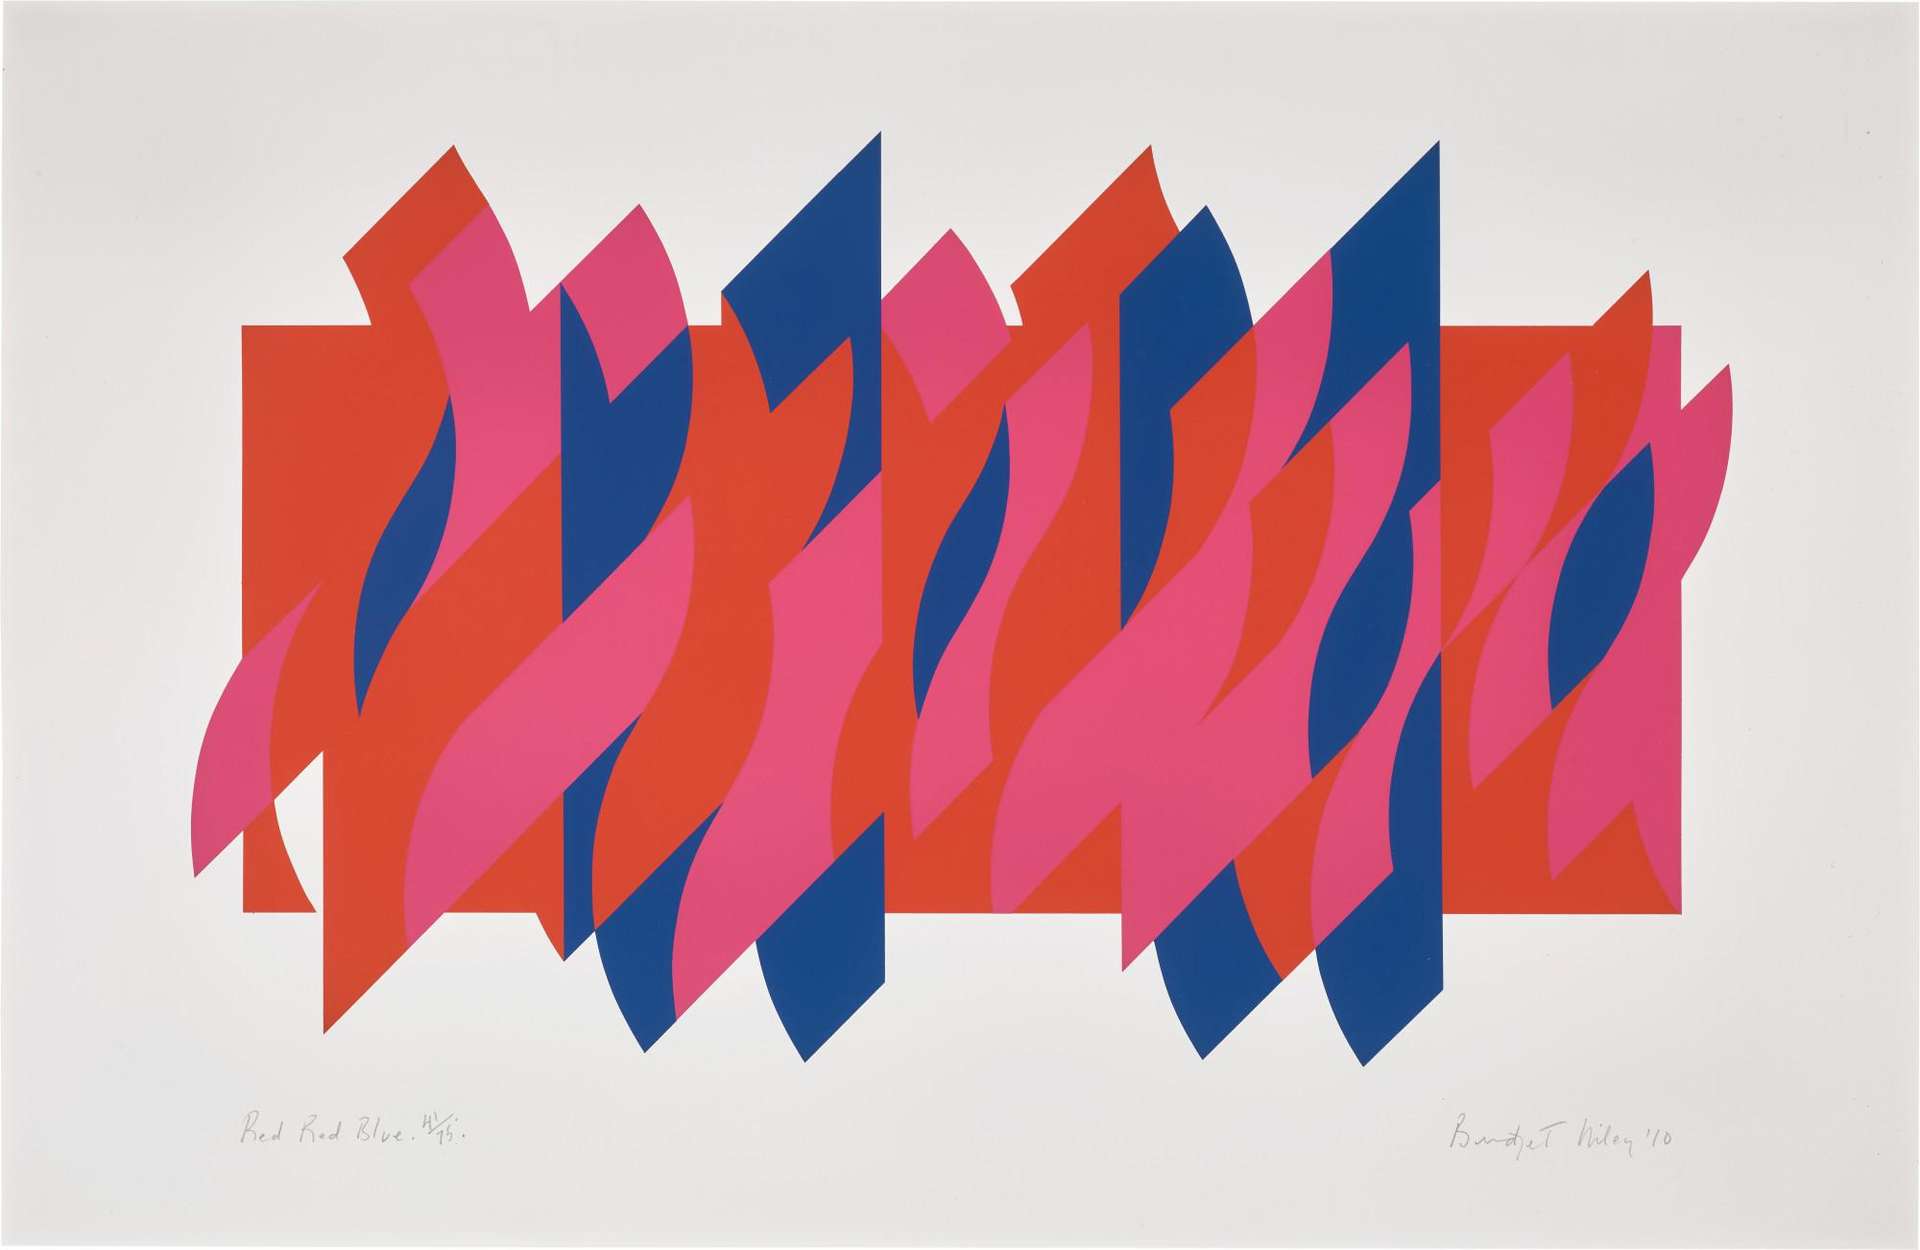 An image of the print Red Red Blue by the artist Bridget Riley. The abstract artwork is composed of several shapes in red, pink and blue.